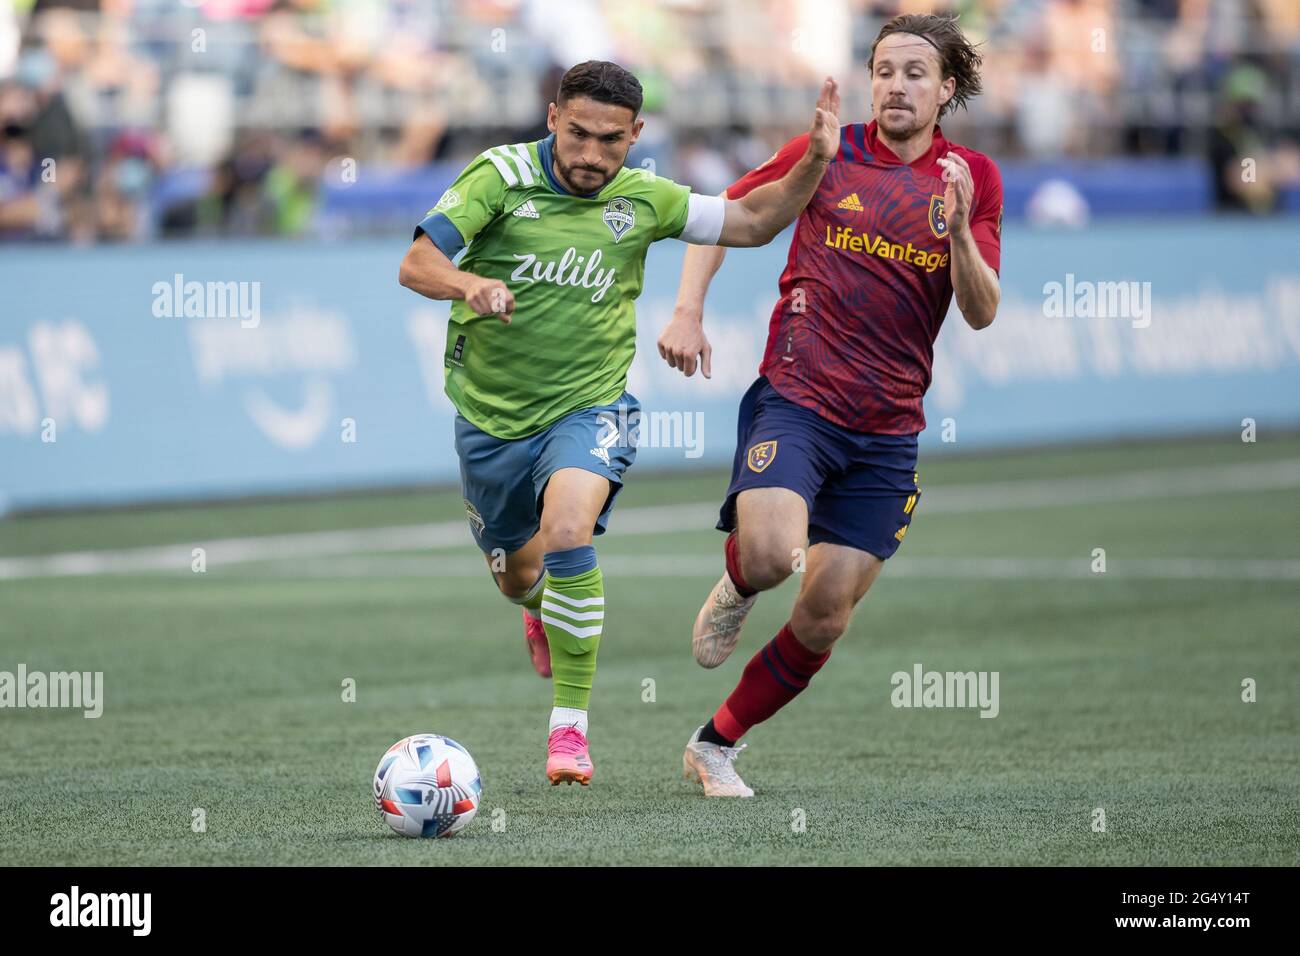 Seattle Sounders midfielder Cristian Roldan (7) running with the ball past Real Salt Lake midfielder Nick Besler (13) during the first half of an MLS Stock Photo